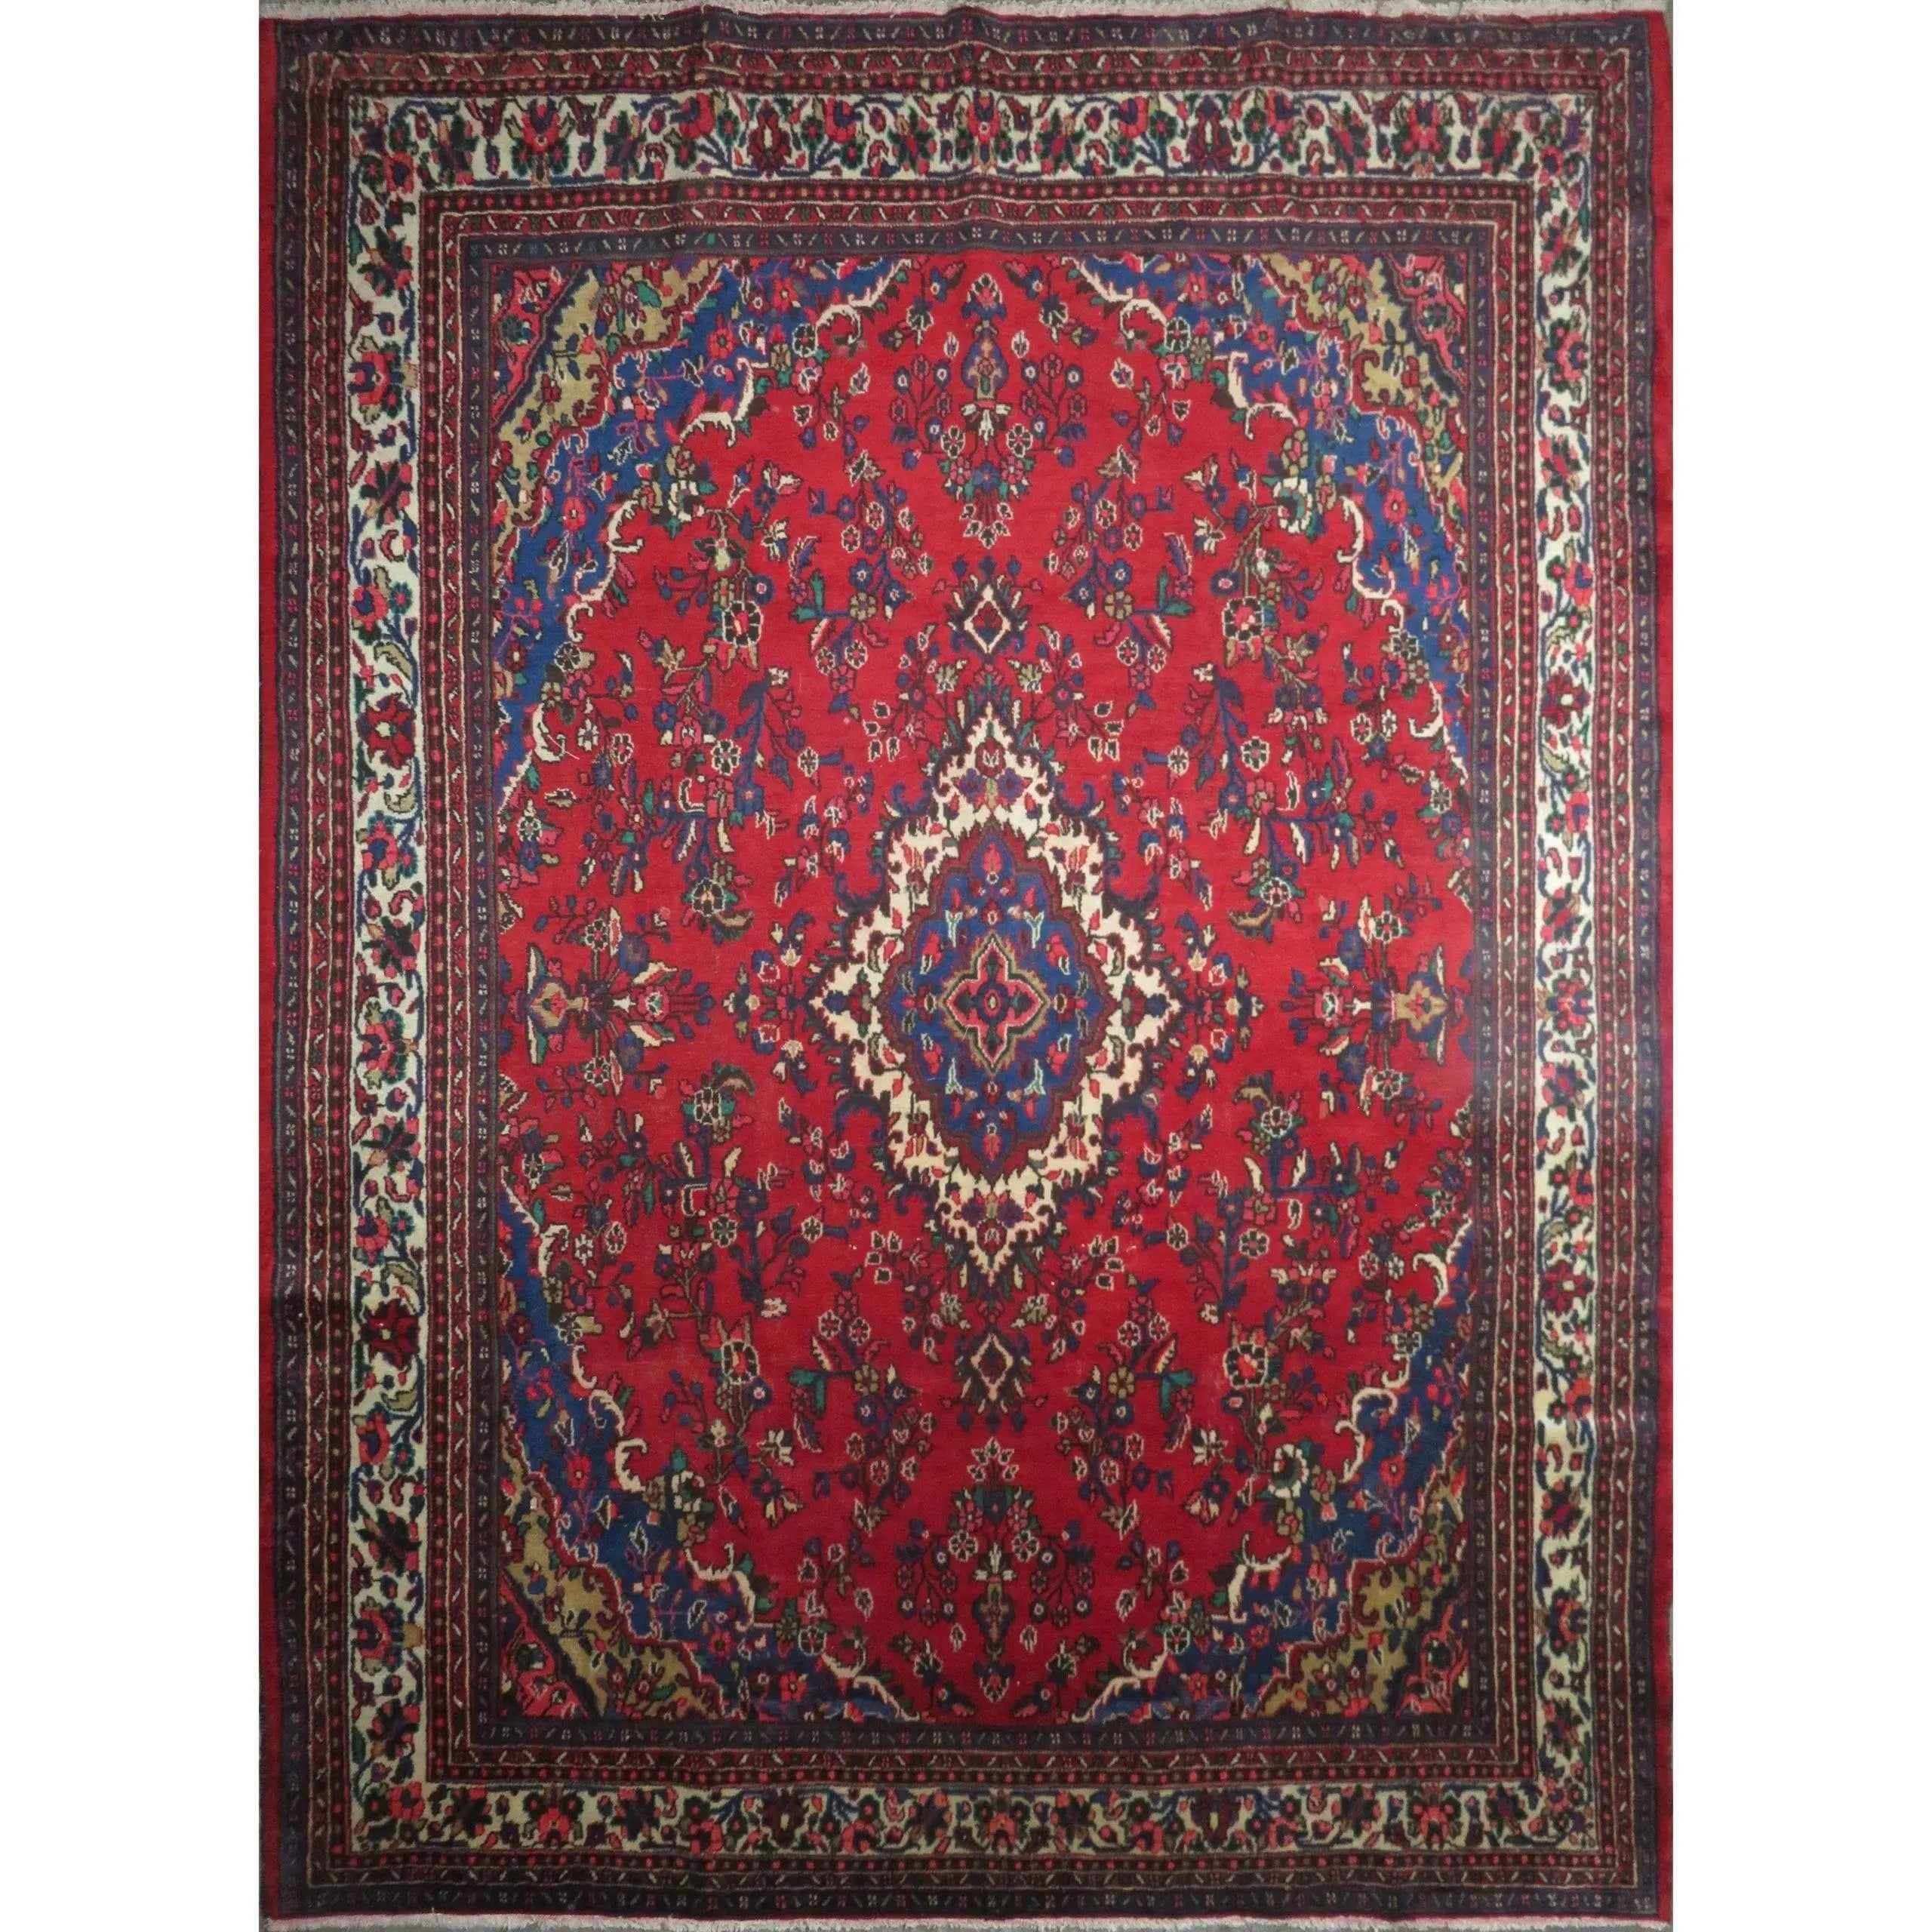 Hand-Knotted Persian Wool Rug _ Luxurious Vintage Design, 13'4" x 9'9", Artisan Crafted